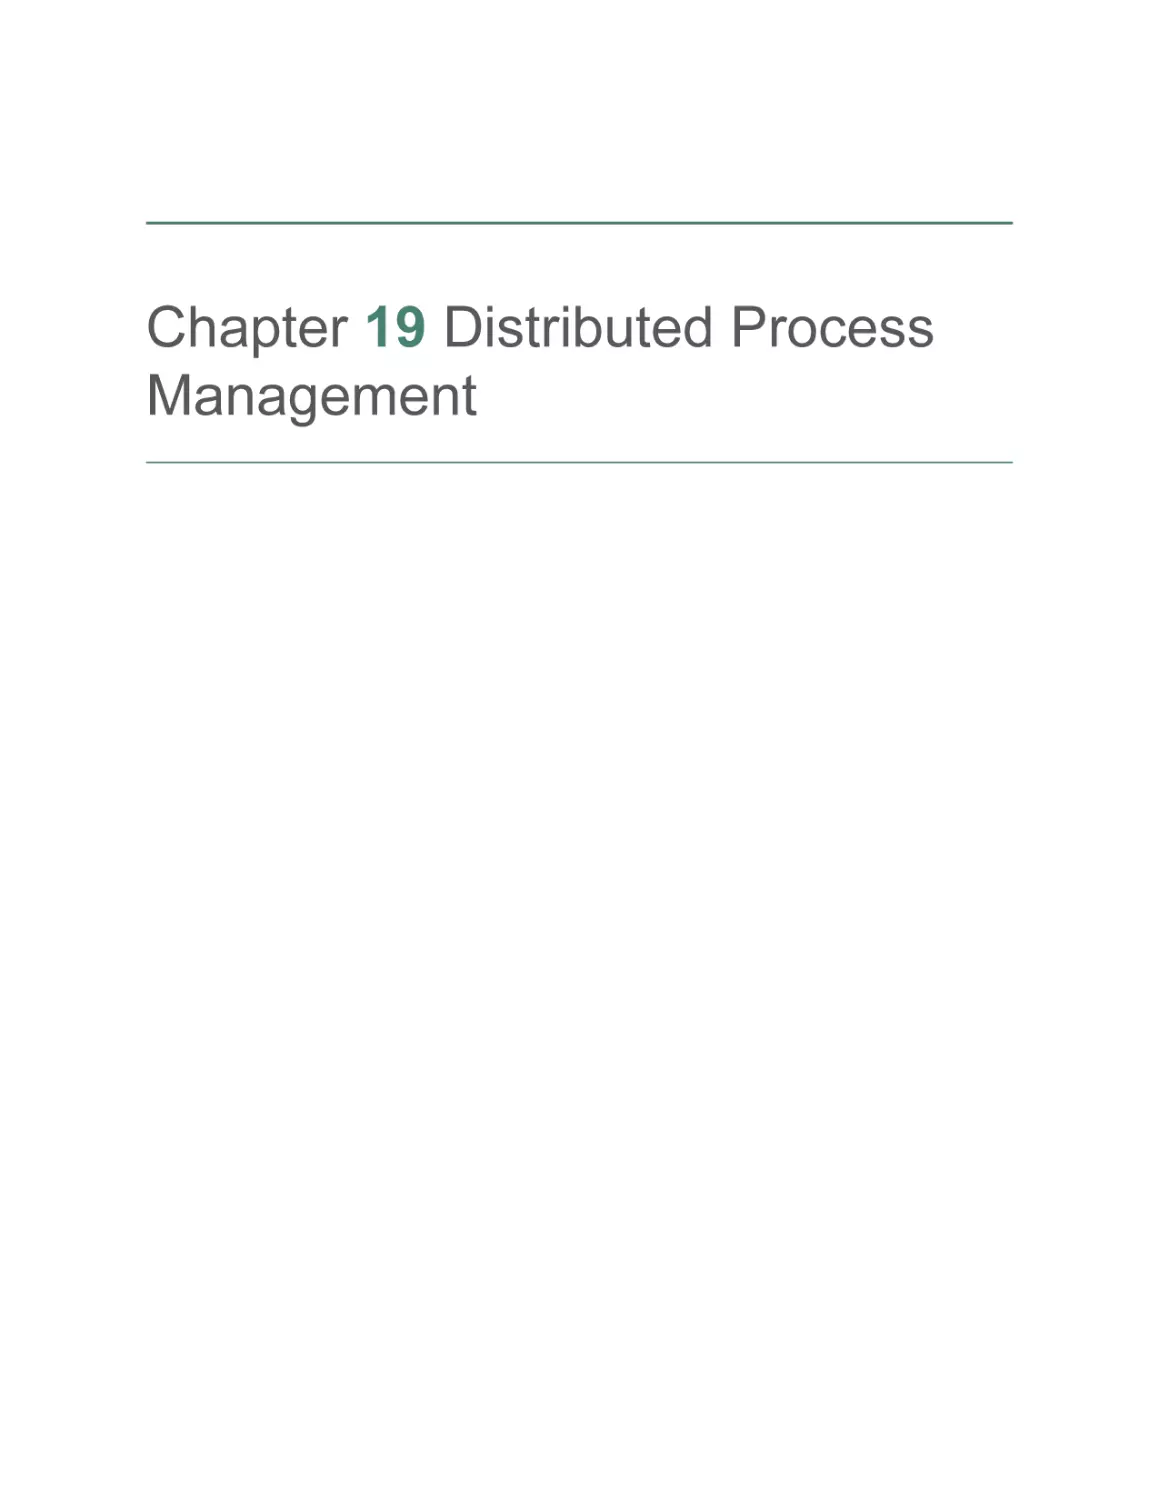 Chapter 19 Distributed Process Management